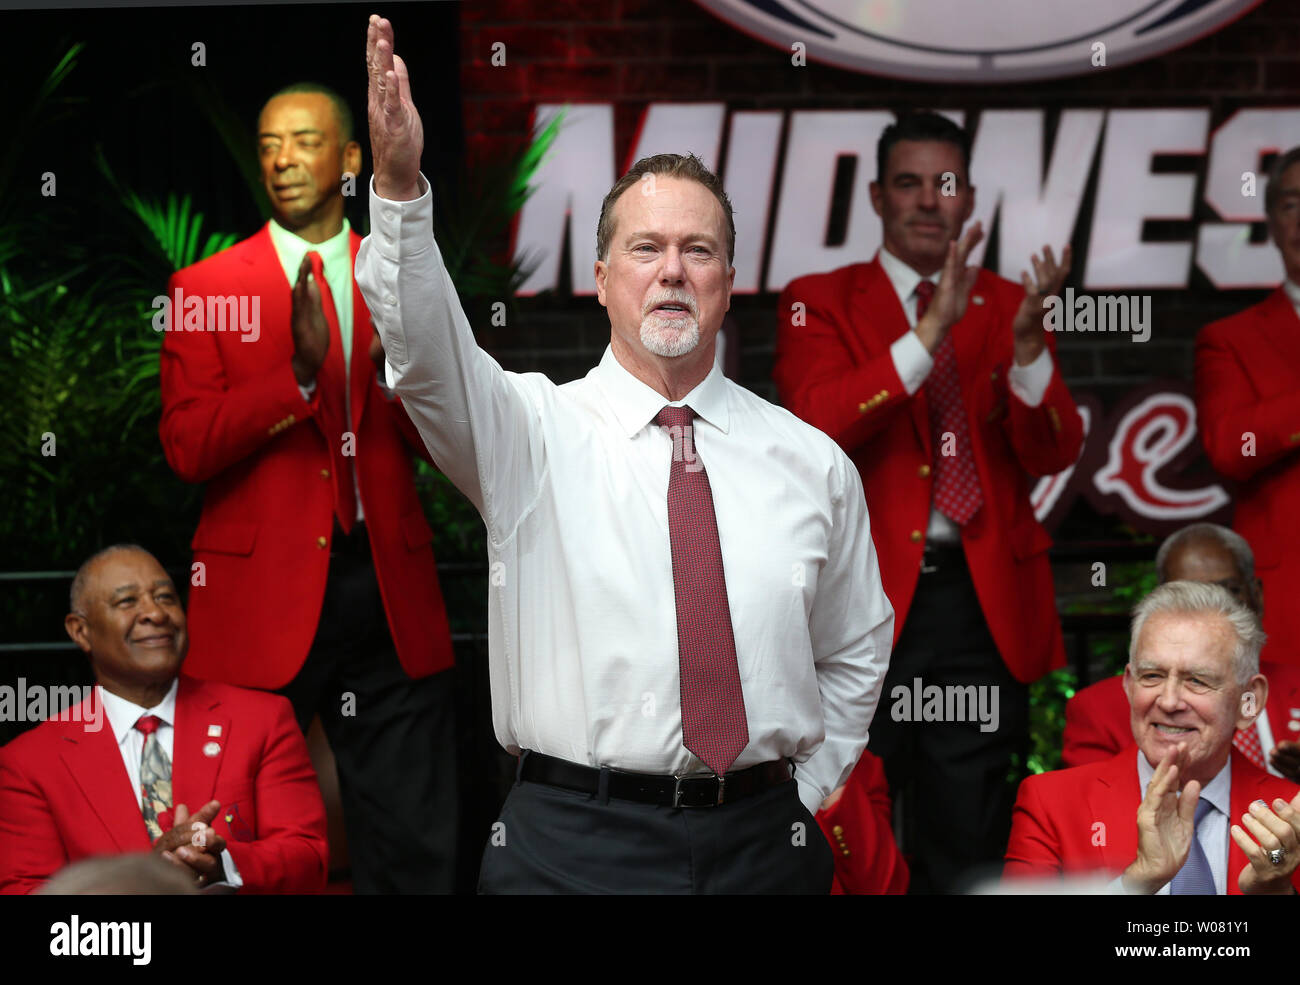 Newly inducted St. Louis Cardinals Hall of Fame member Mark McGwire waves to the fans as he is introduced during the St. Louis Cardinals Hall of Fame Induction ceremonies in St. Louis on August 26, 2017. McGwire played 4 1/2 years with the Cardinals breaking Roger Maris' home run record, hitting 70 home runs in 1998 and is now the bench coach for the San Diego Padres.       Photo by Bill Greenblatt/UPI Stock Photo